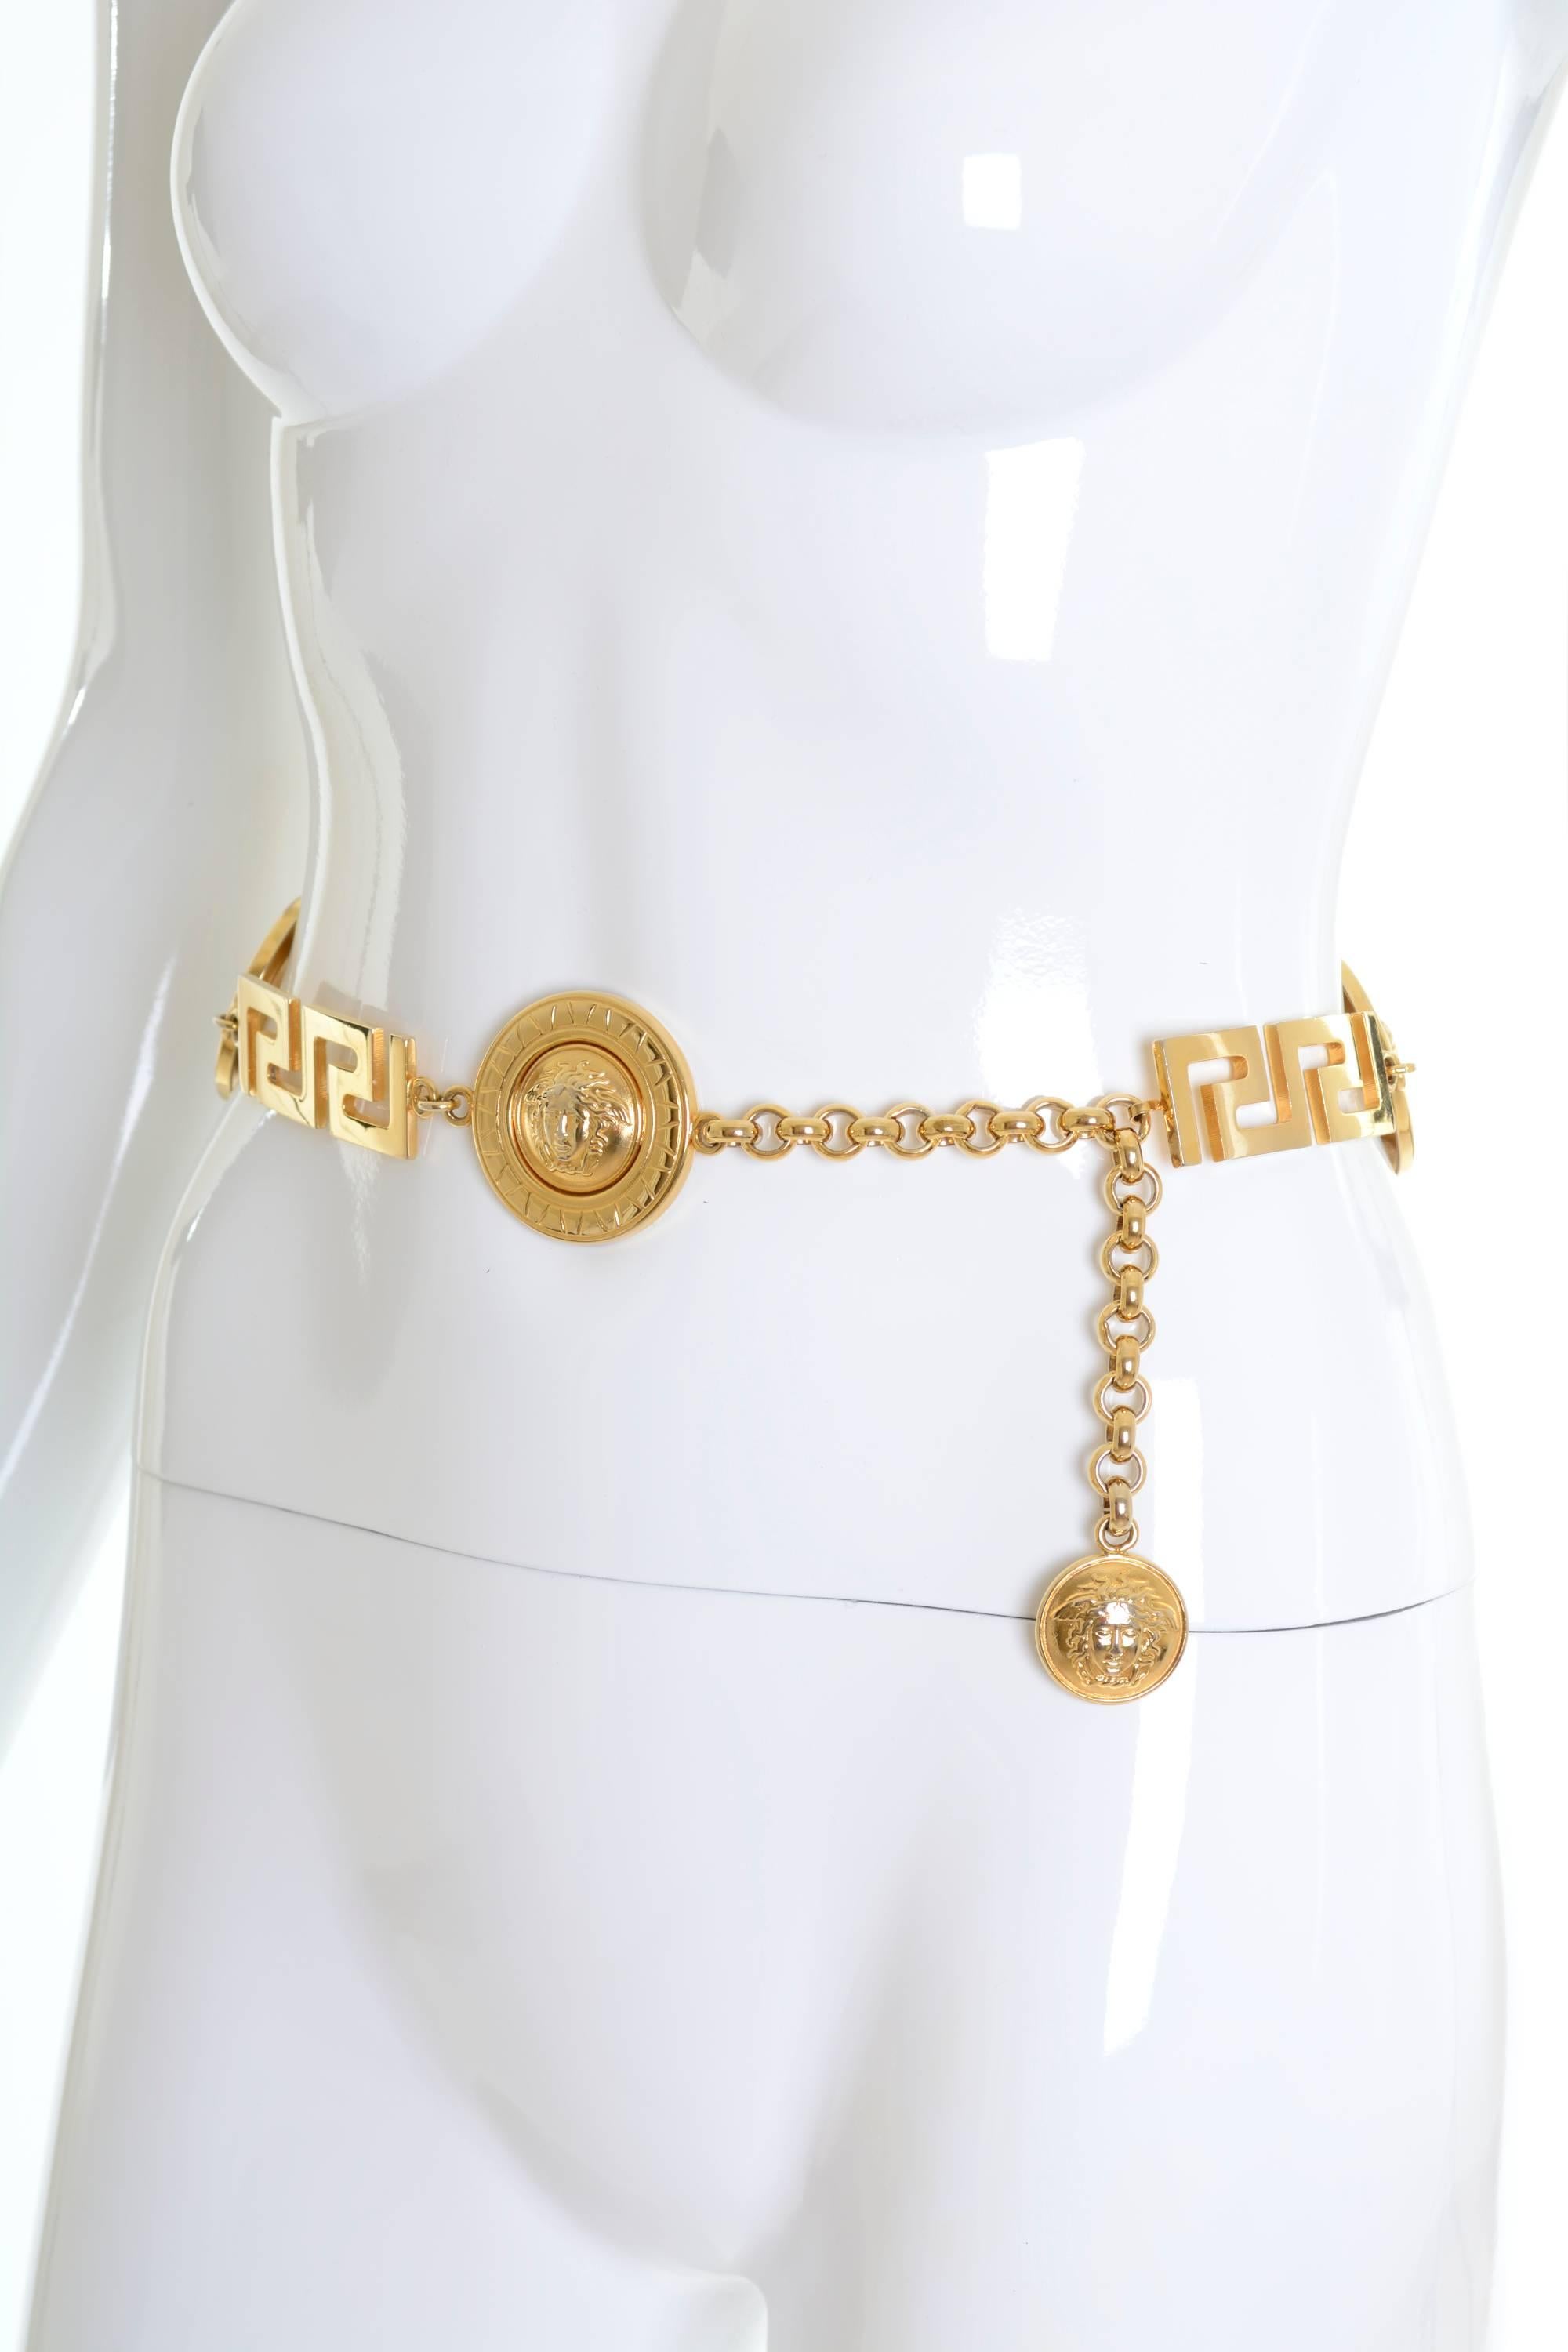 This stunning and iconic 1990s Versace  Medusa belt is made of golden metal large chain with Medusa head detailing. 

Good vintage condition

Measurements:
Lenght adjustable from around 24 to 30 inches
Height 2 inches